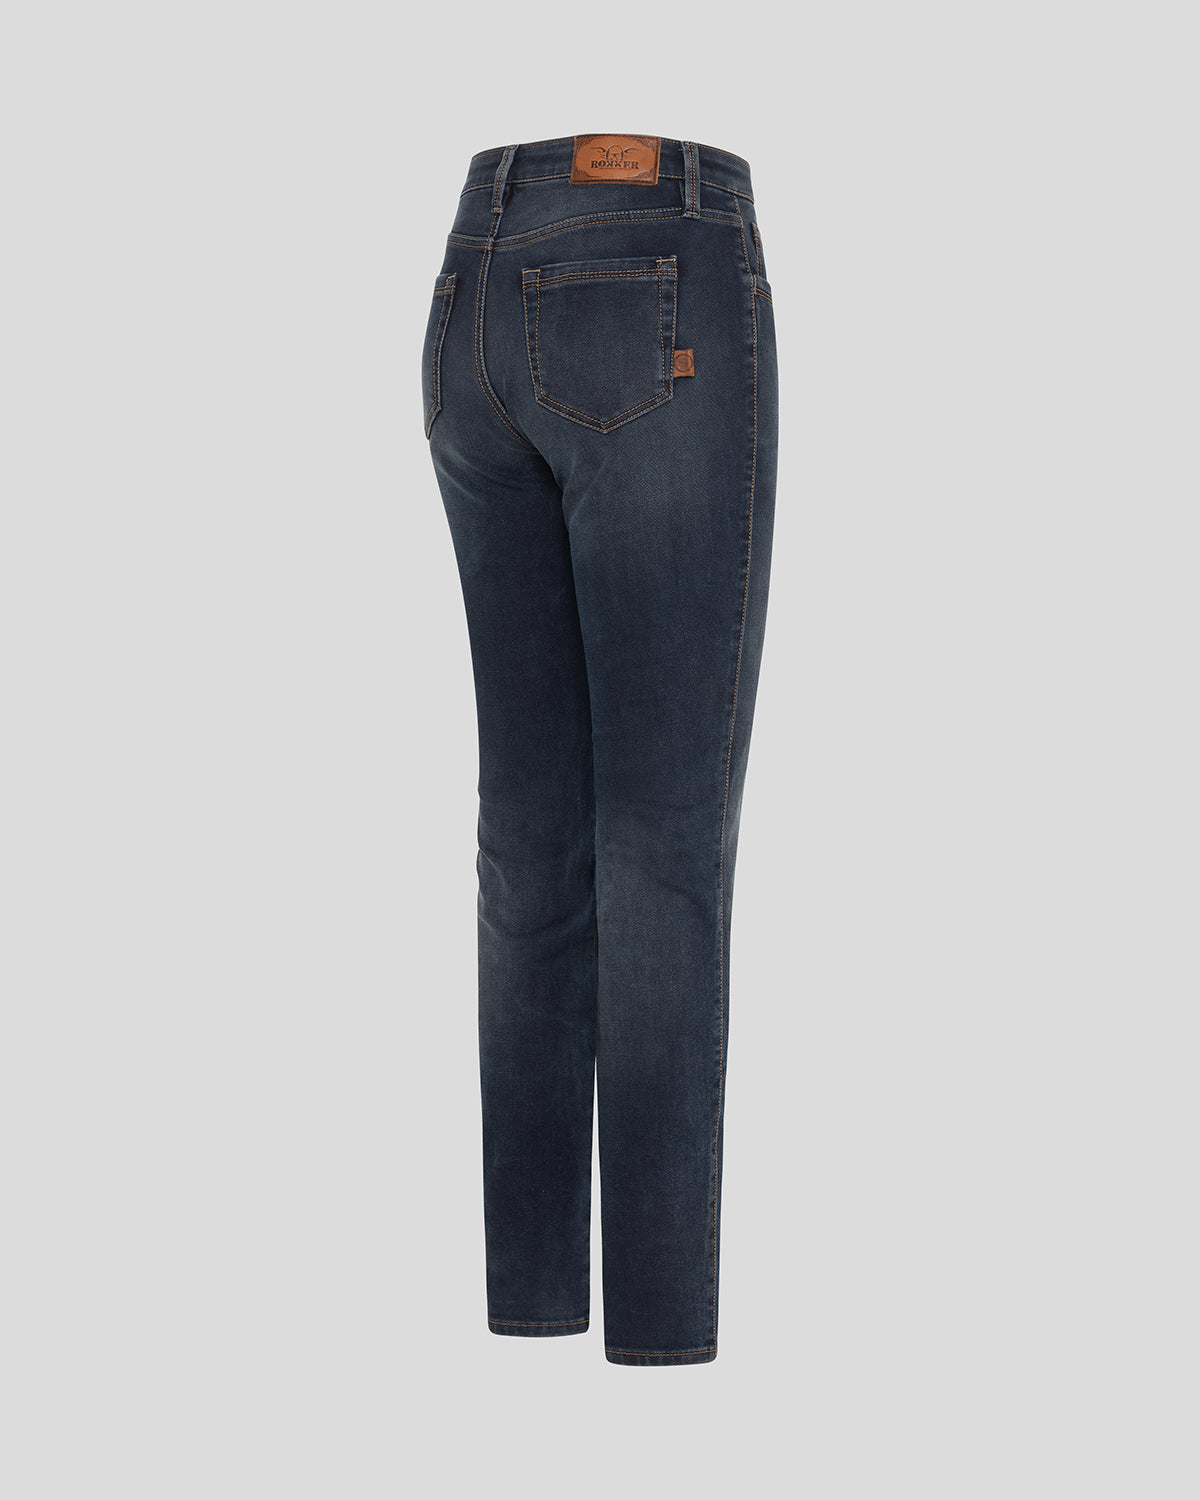 Women's motorcycle jeans that fit like everyday jeans ▻ by ROKKER